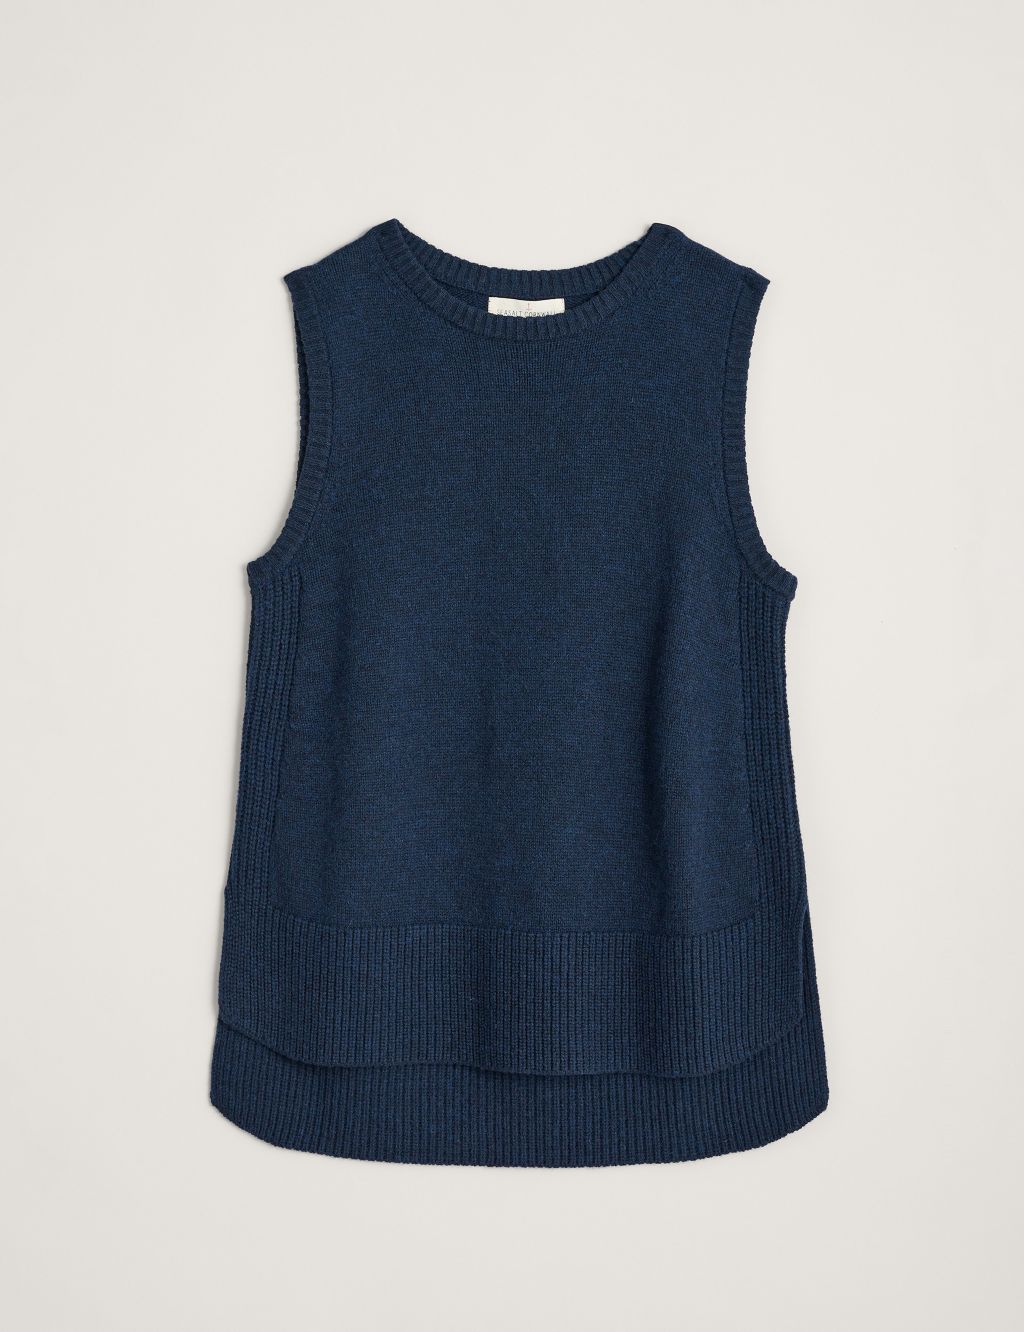 Merino Wool Rich Crew Neck Knitted Top image 2